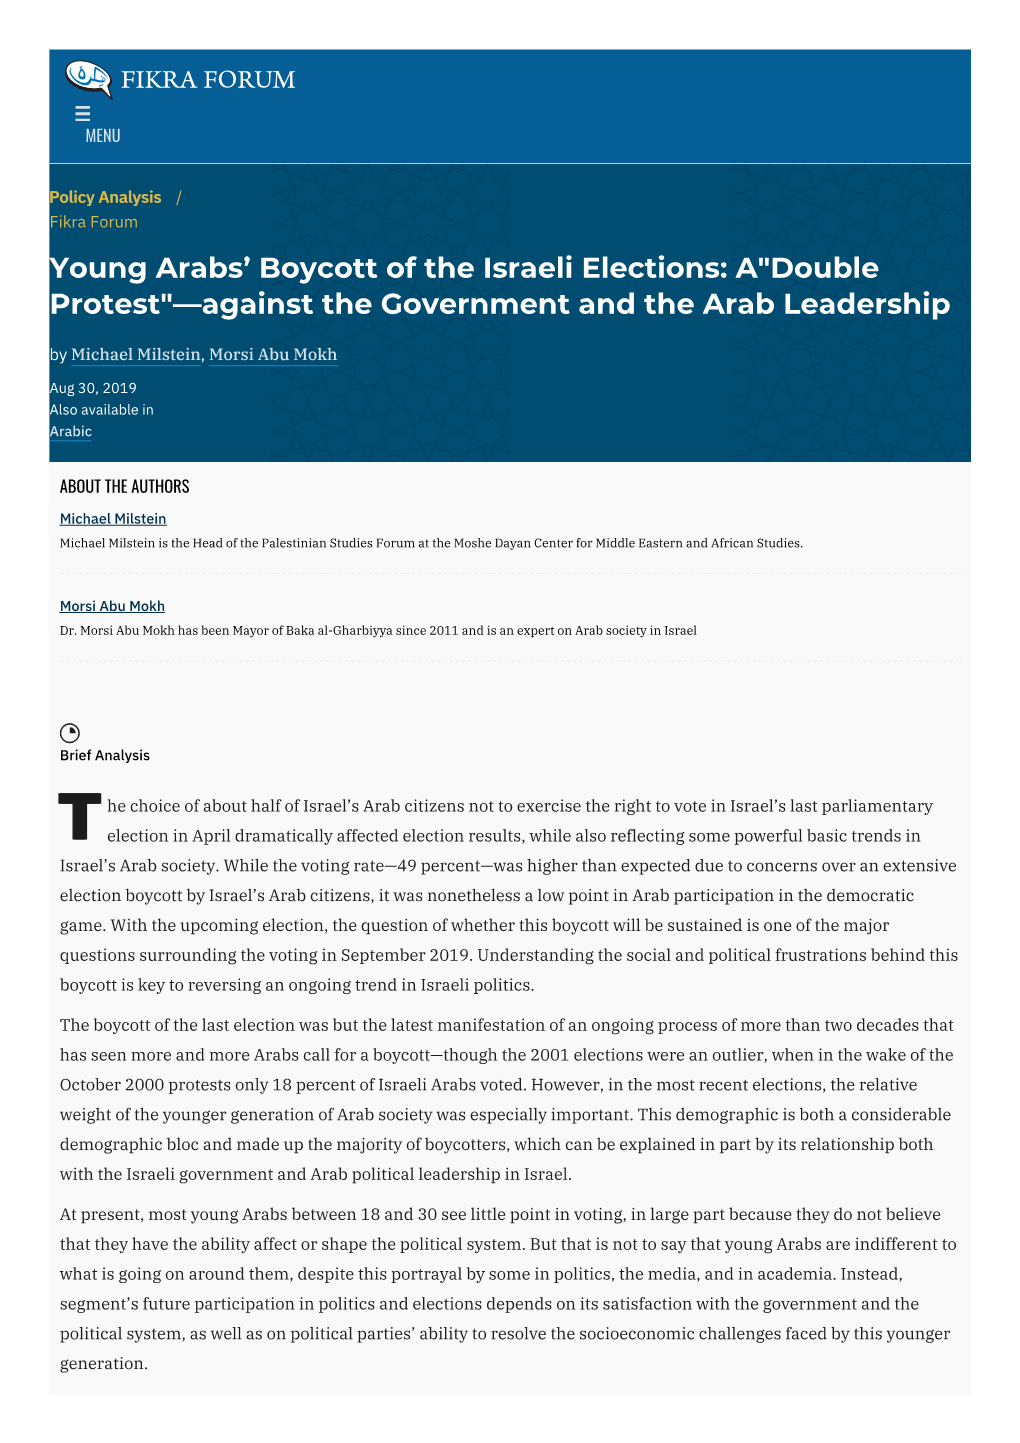 Young Arabs' Boycott of the Israeli Elections: A"Double Protest